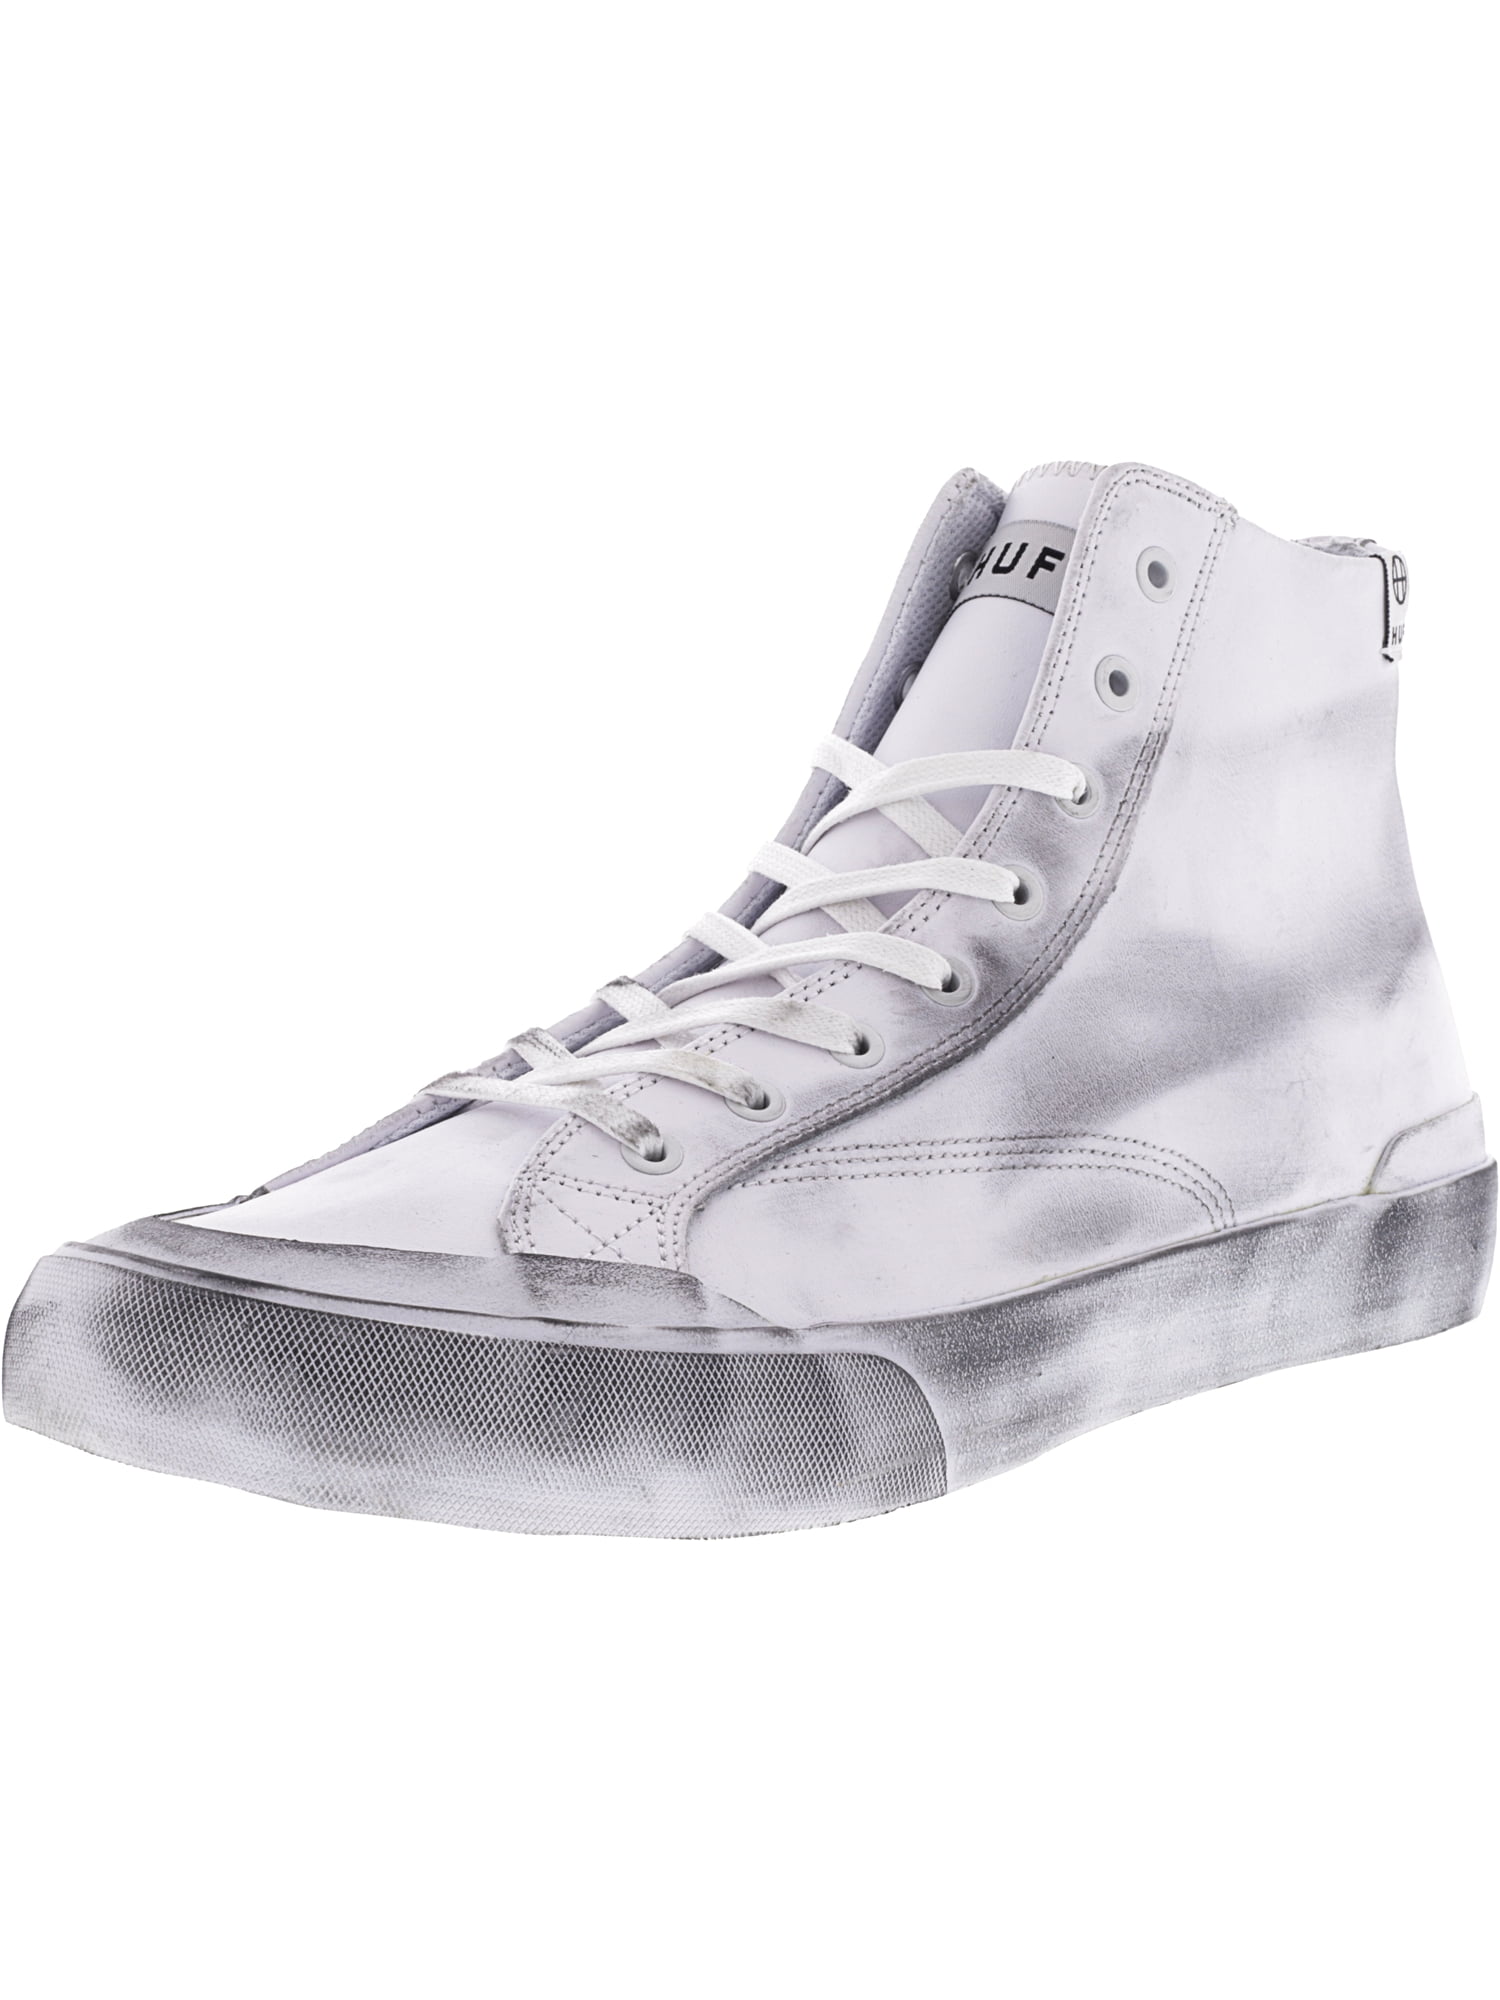 huf high top shoes